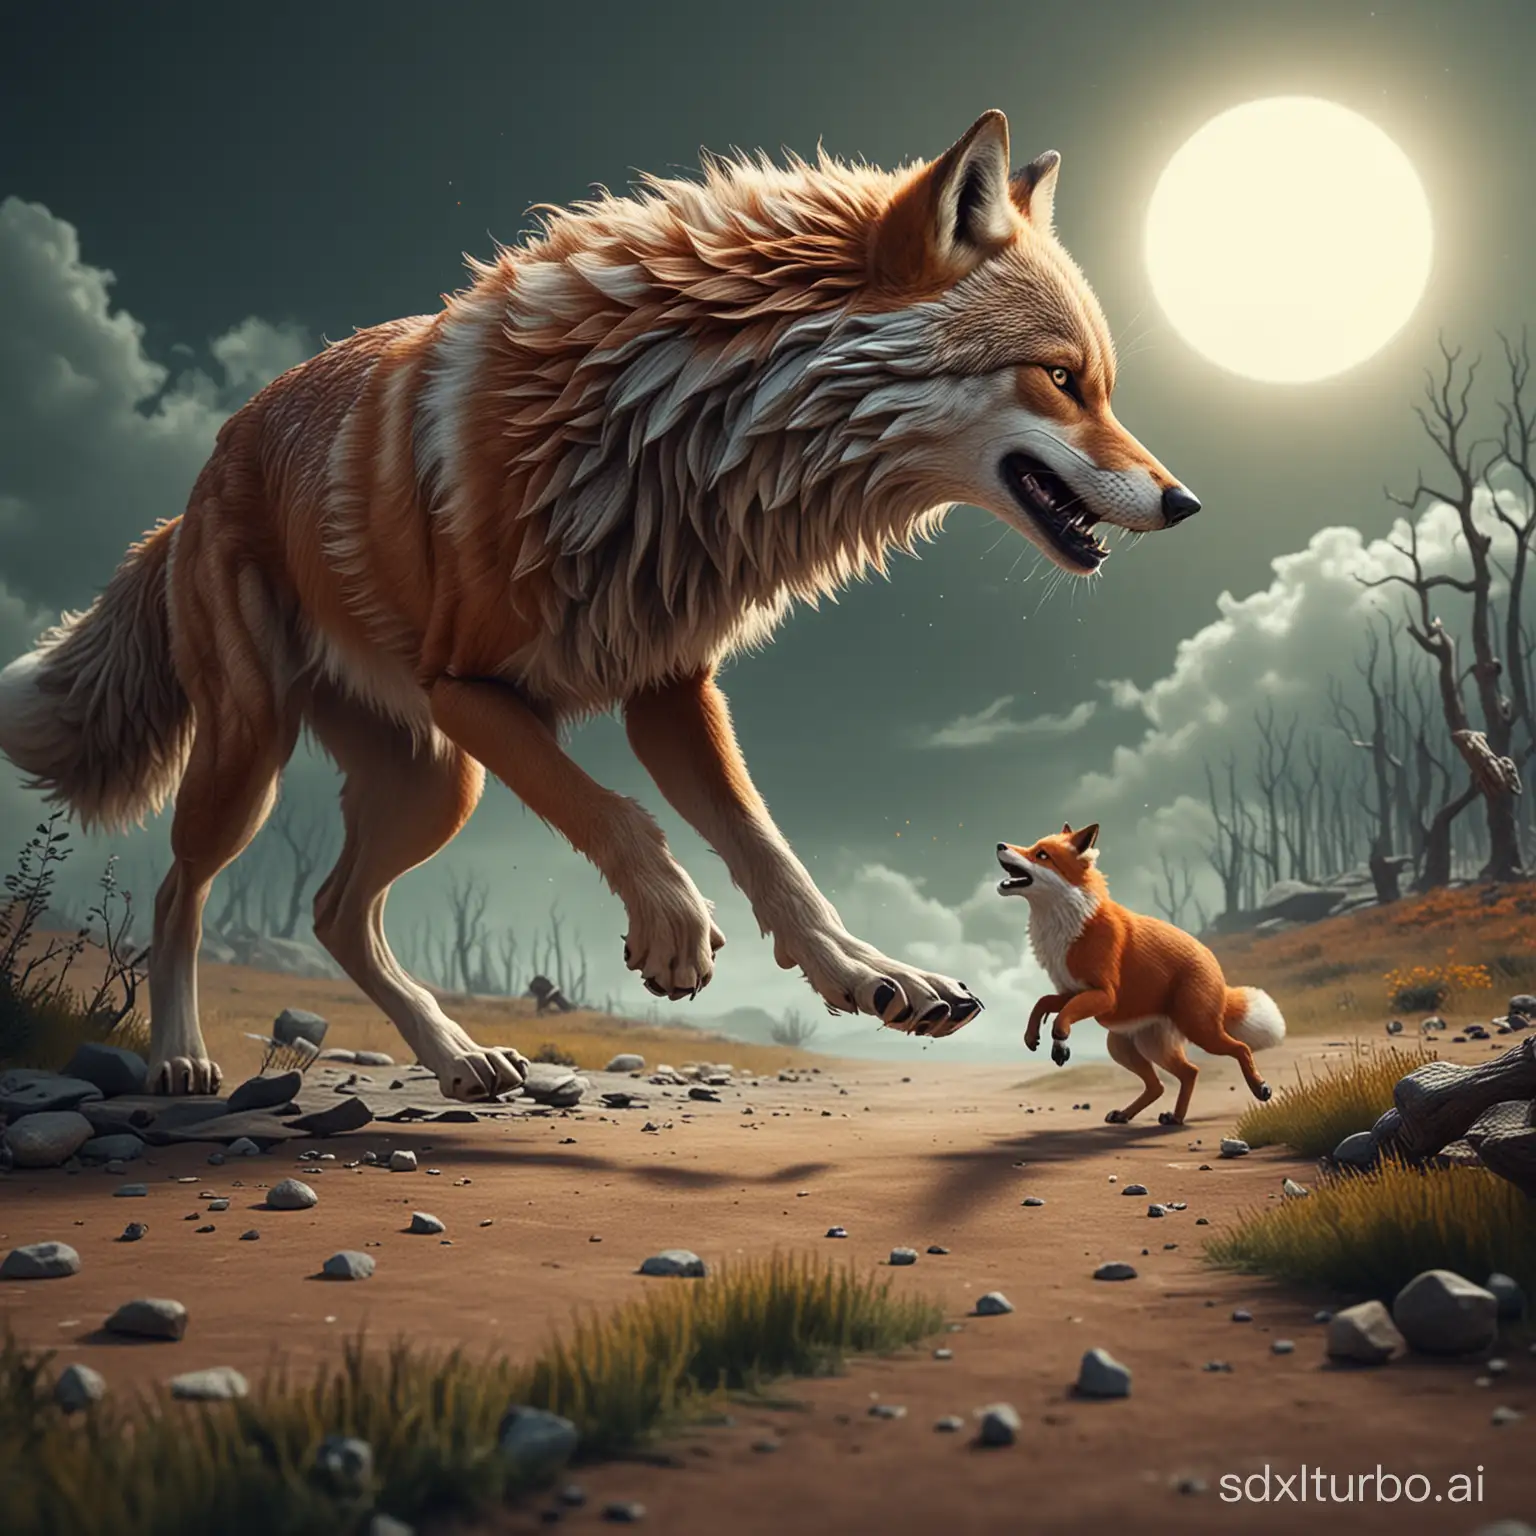 the wolf runs away from the fox, 3D style, fantasy